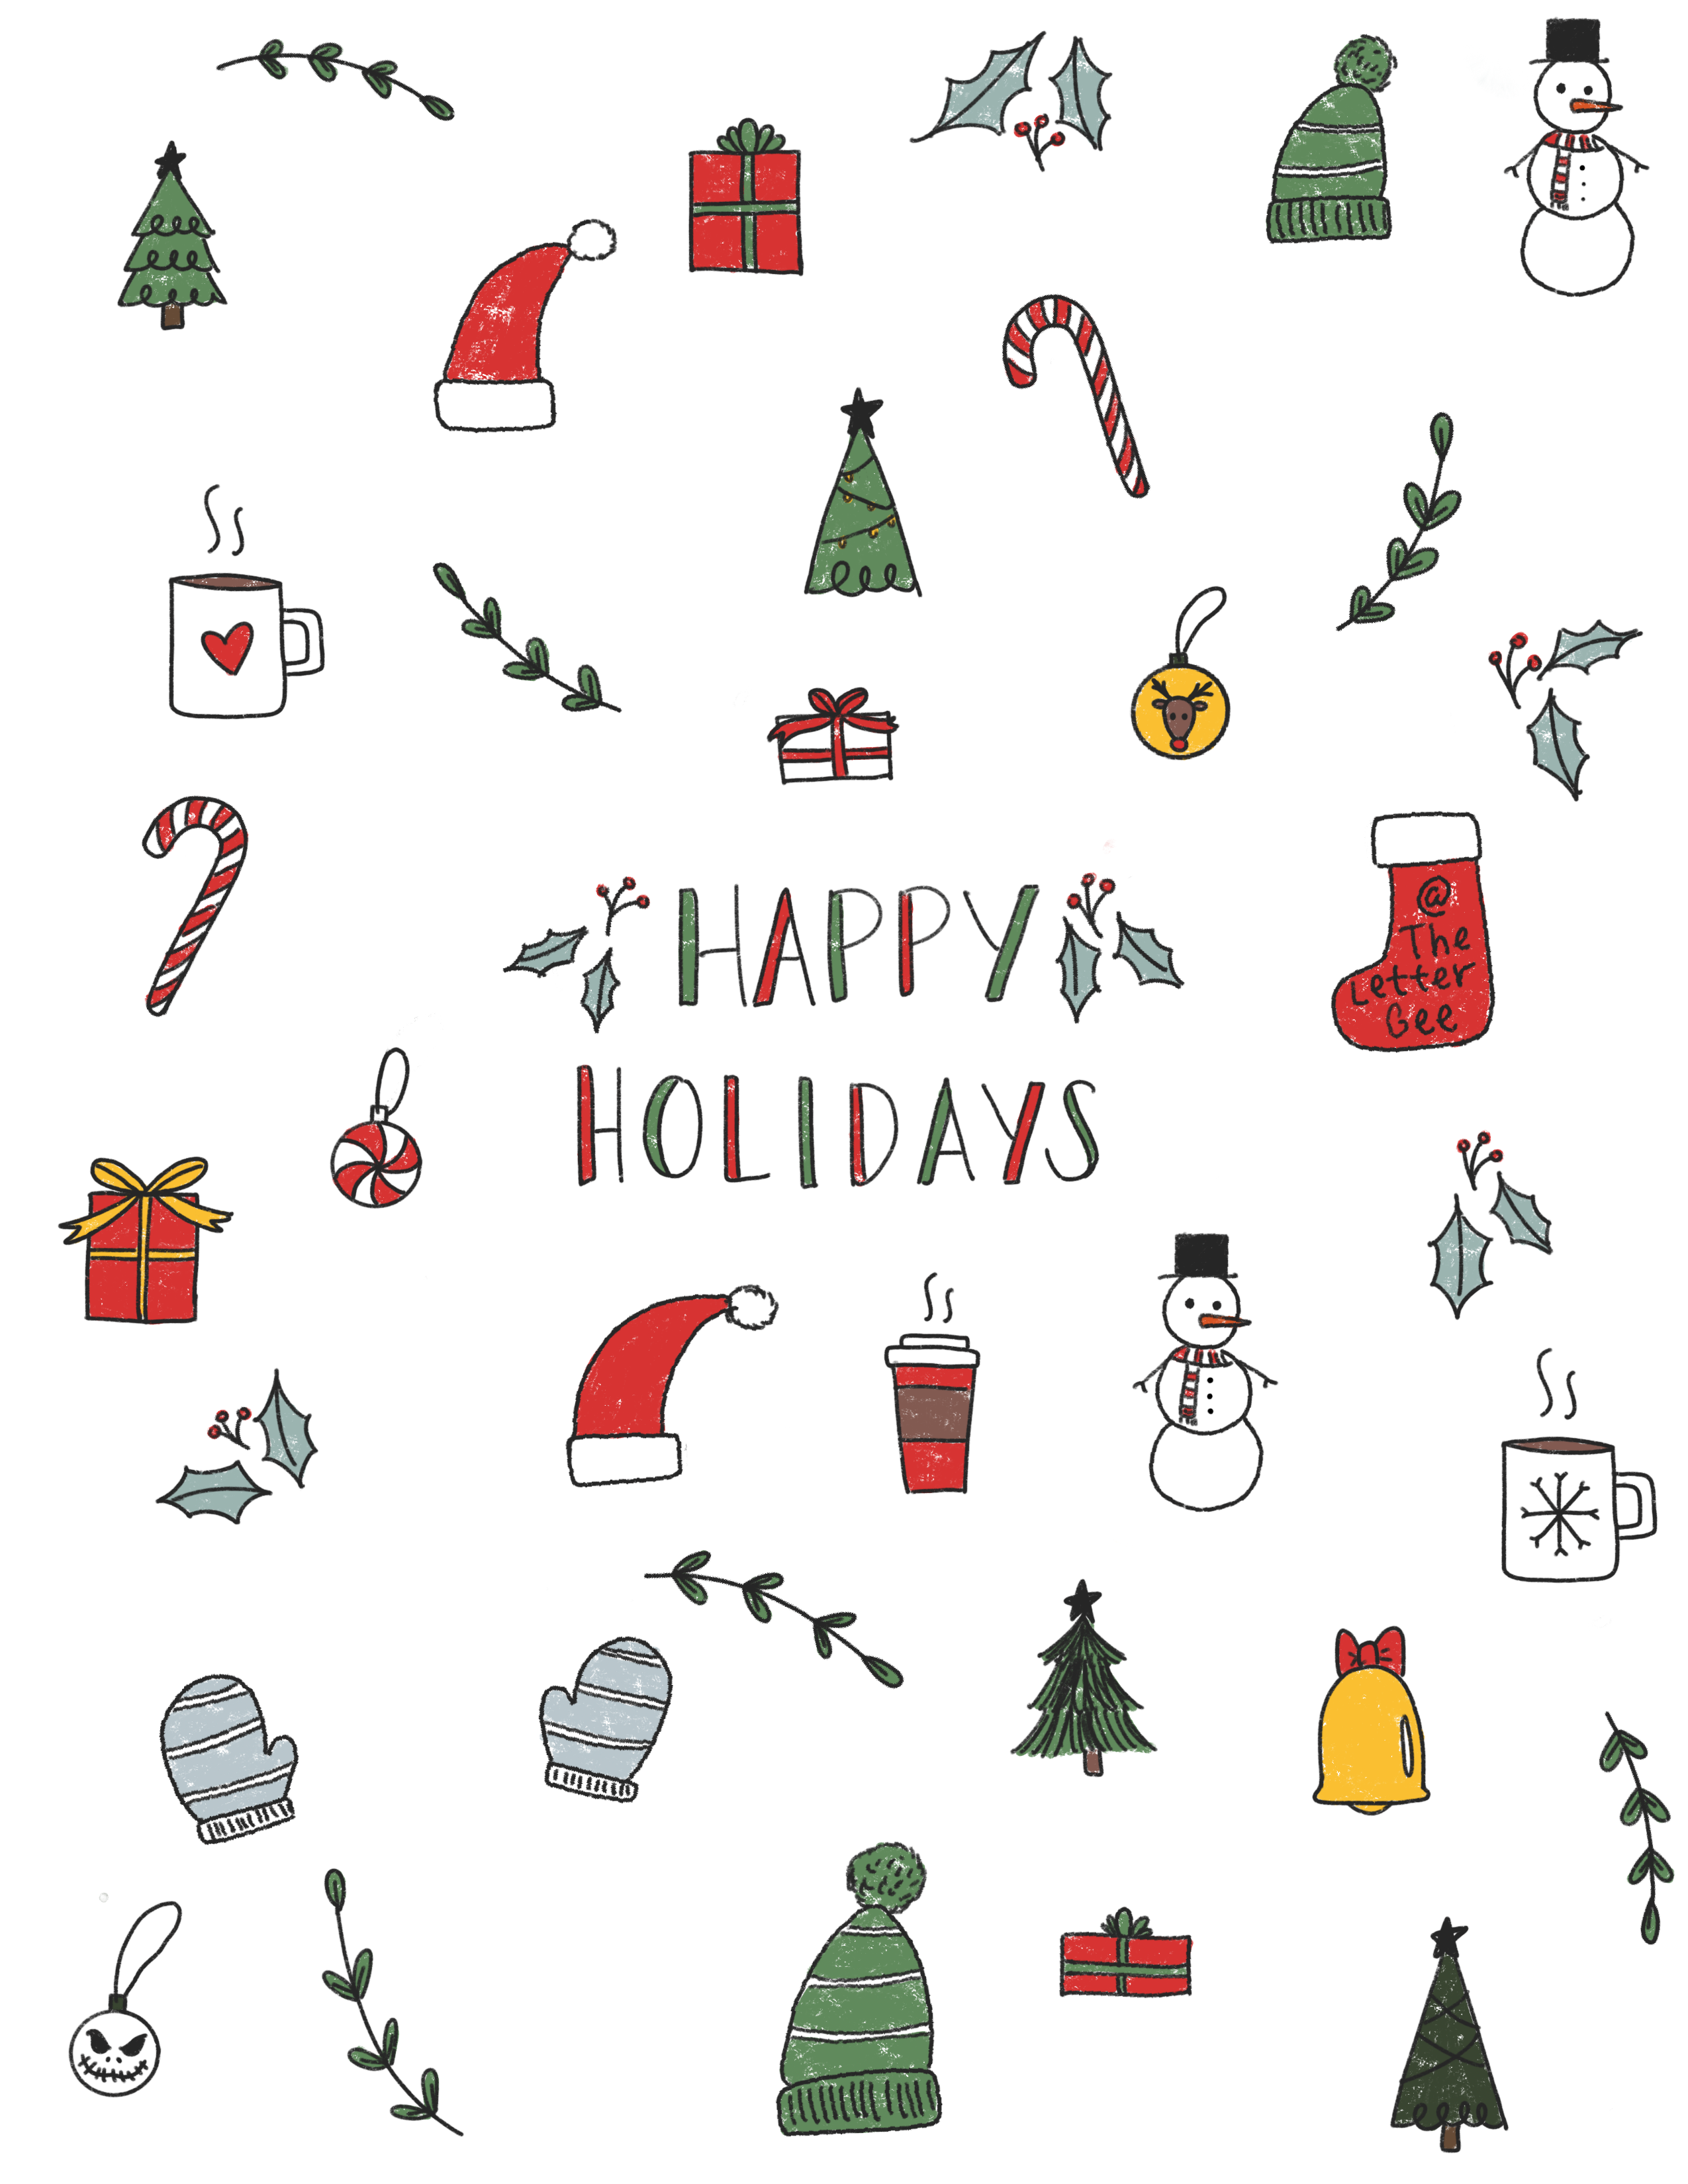 Christmas holiday doodles. Wallpaper iphone christmas, Christmas phone wallpaper, Cute christmas wallpaper